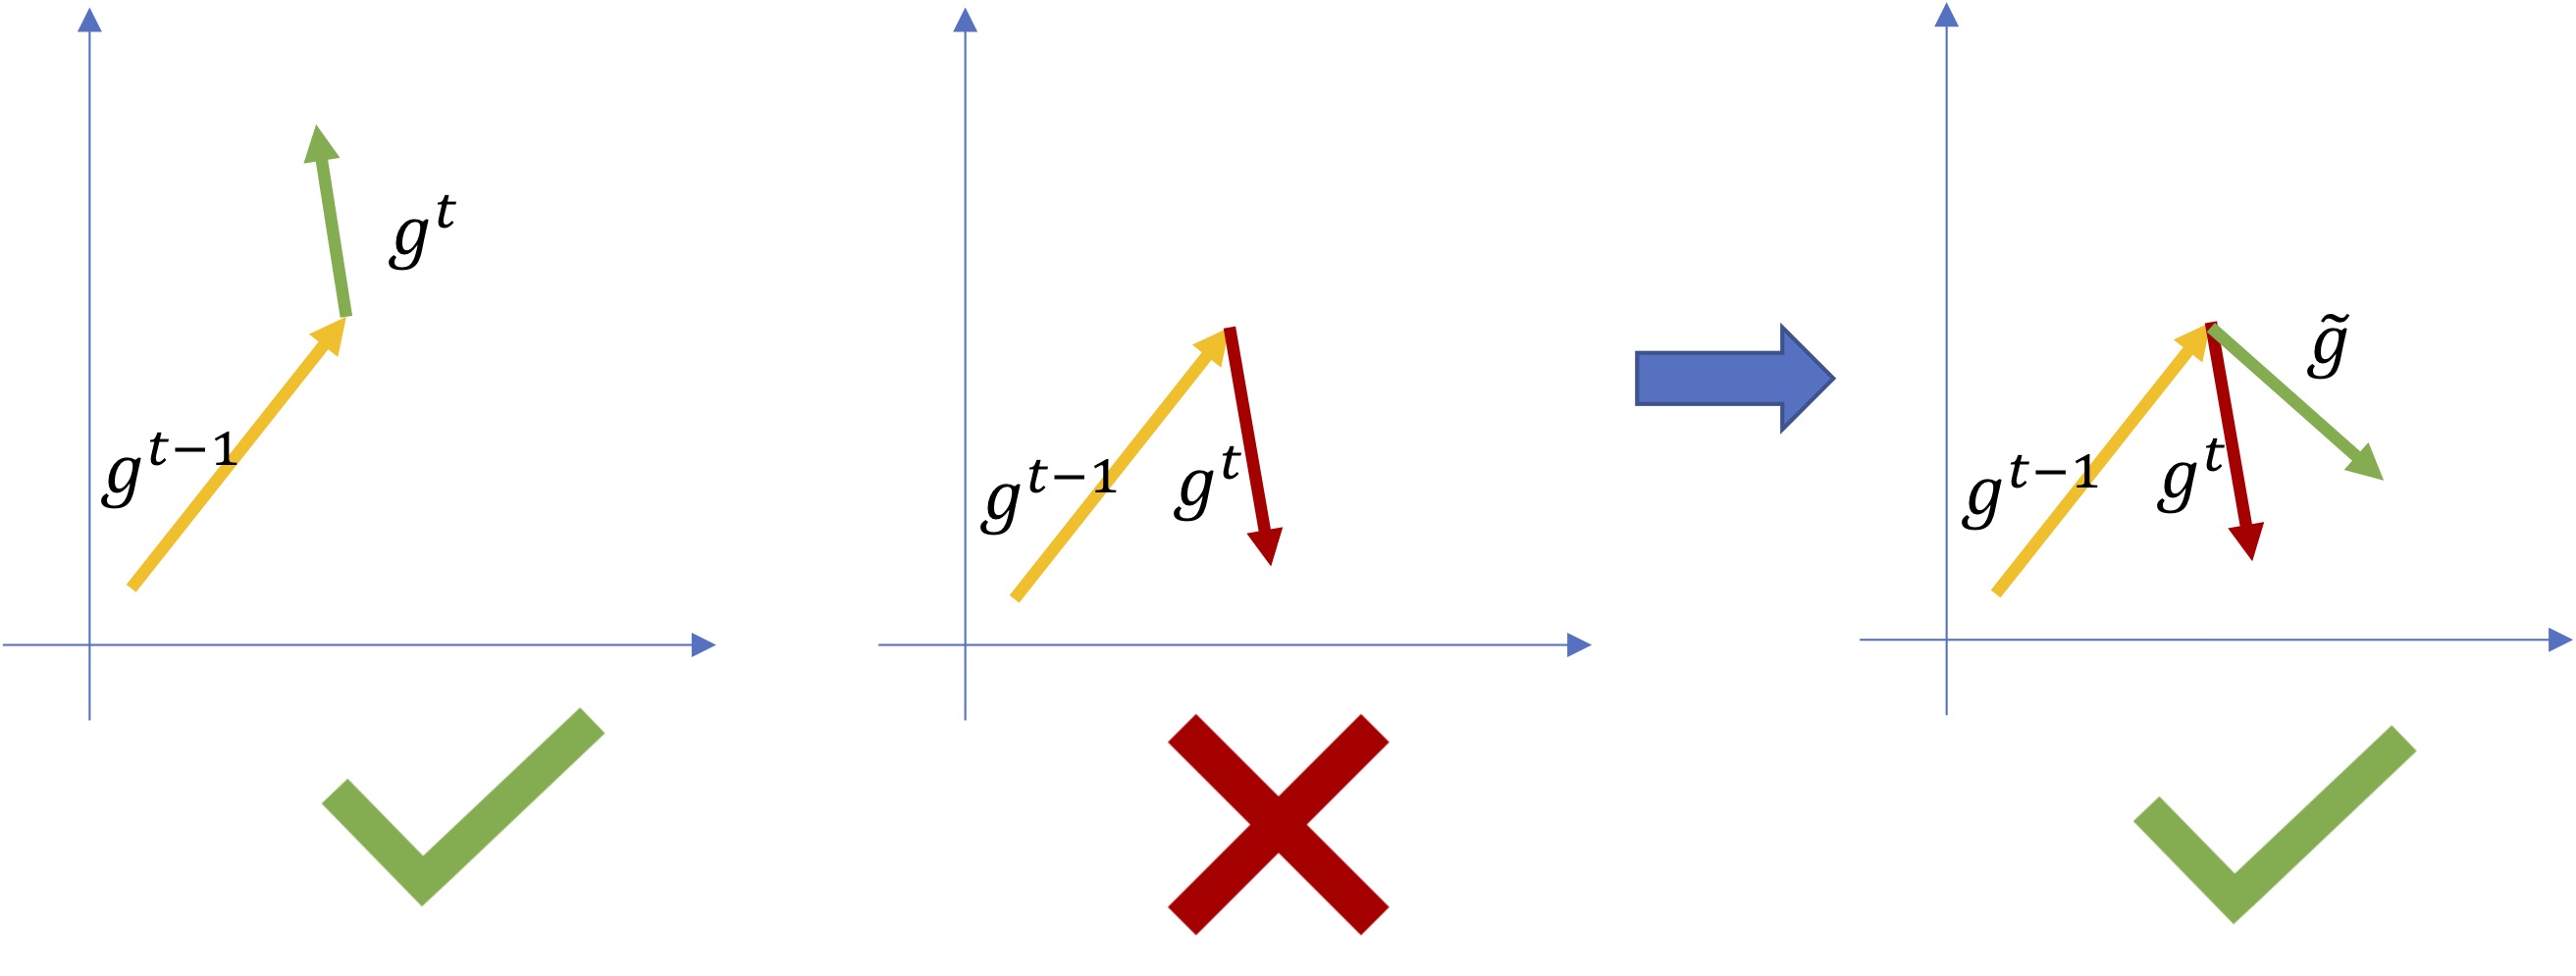 *Figure 6: Gradients must keep going in the same direction, otherwise their direction is fixed.*